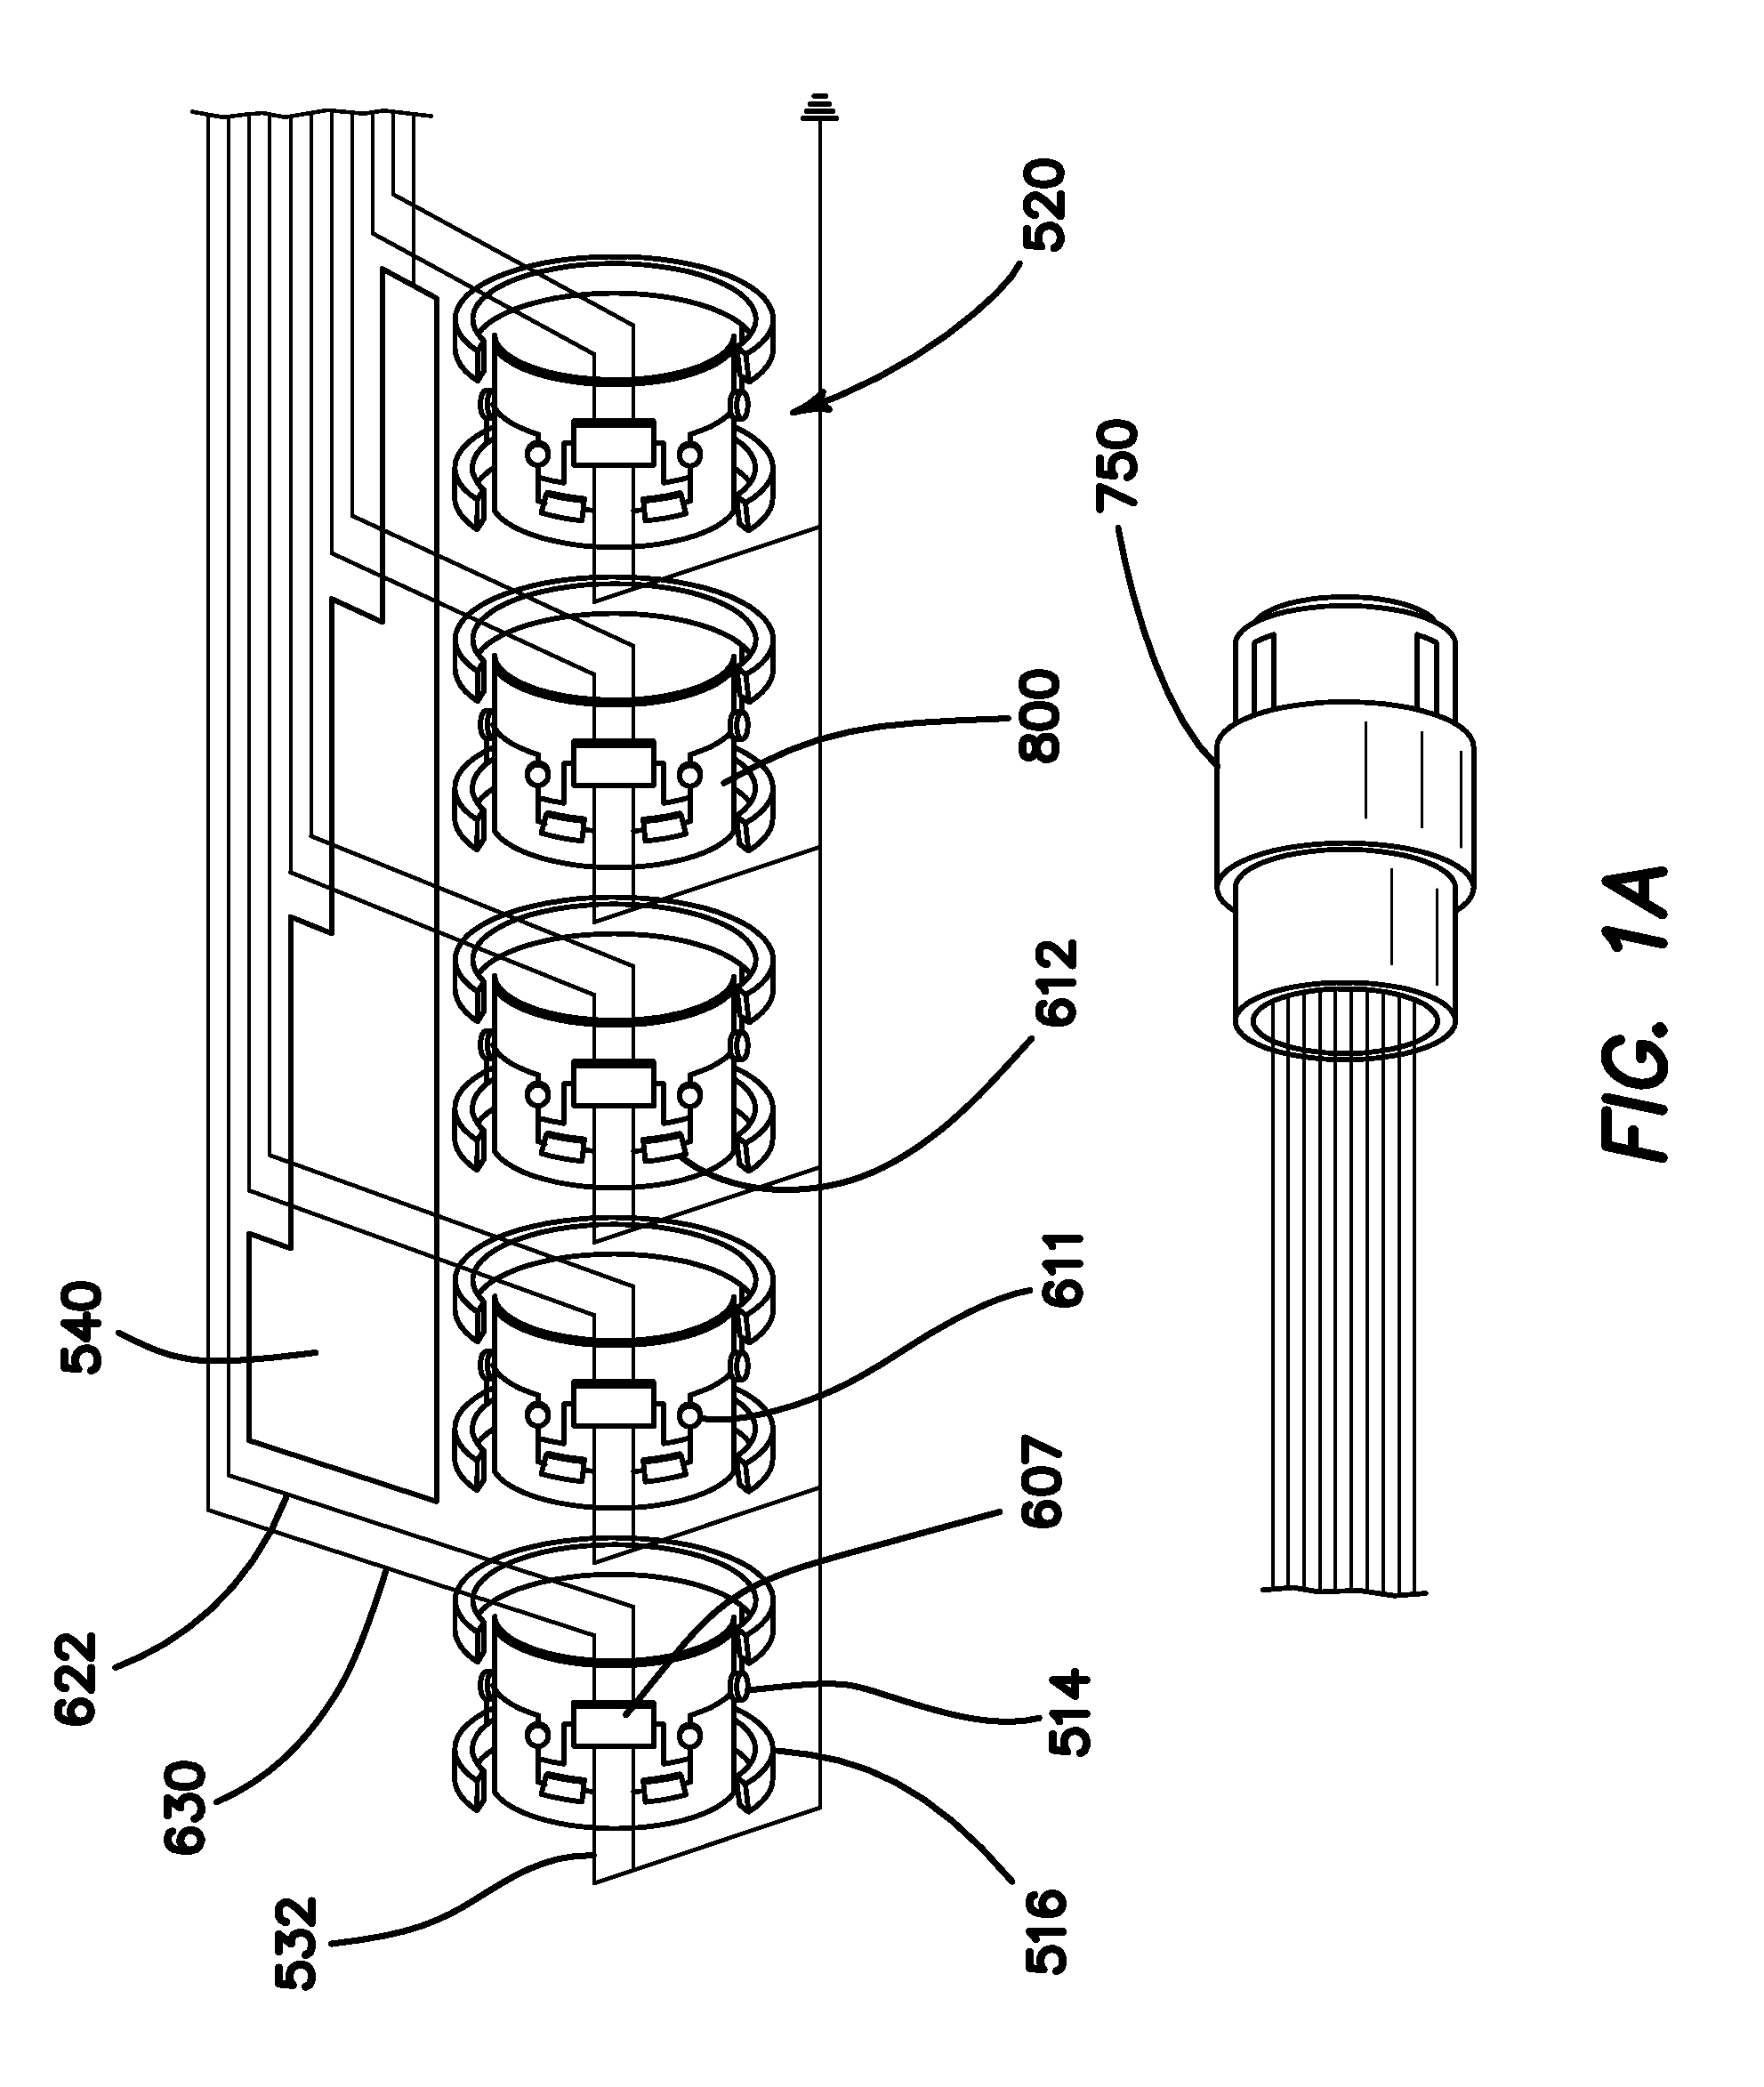 Method and apparatus for measuring biopotential and mapping ephaptic coupling employing a catheter with mosfet sensor array